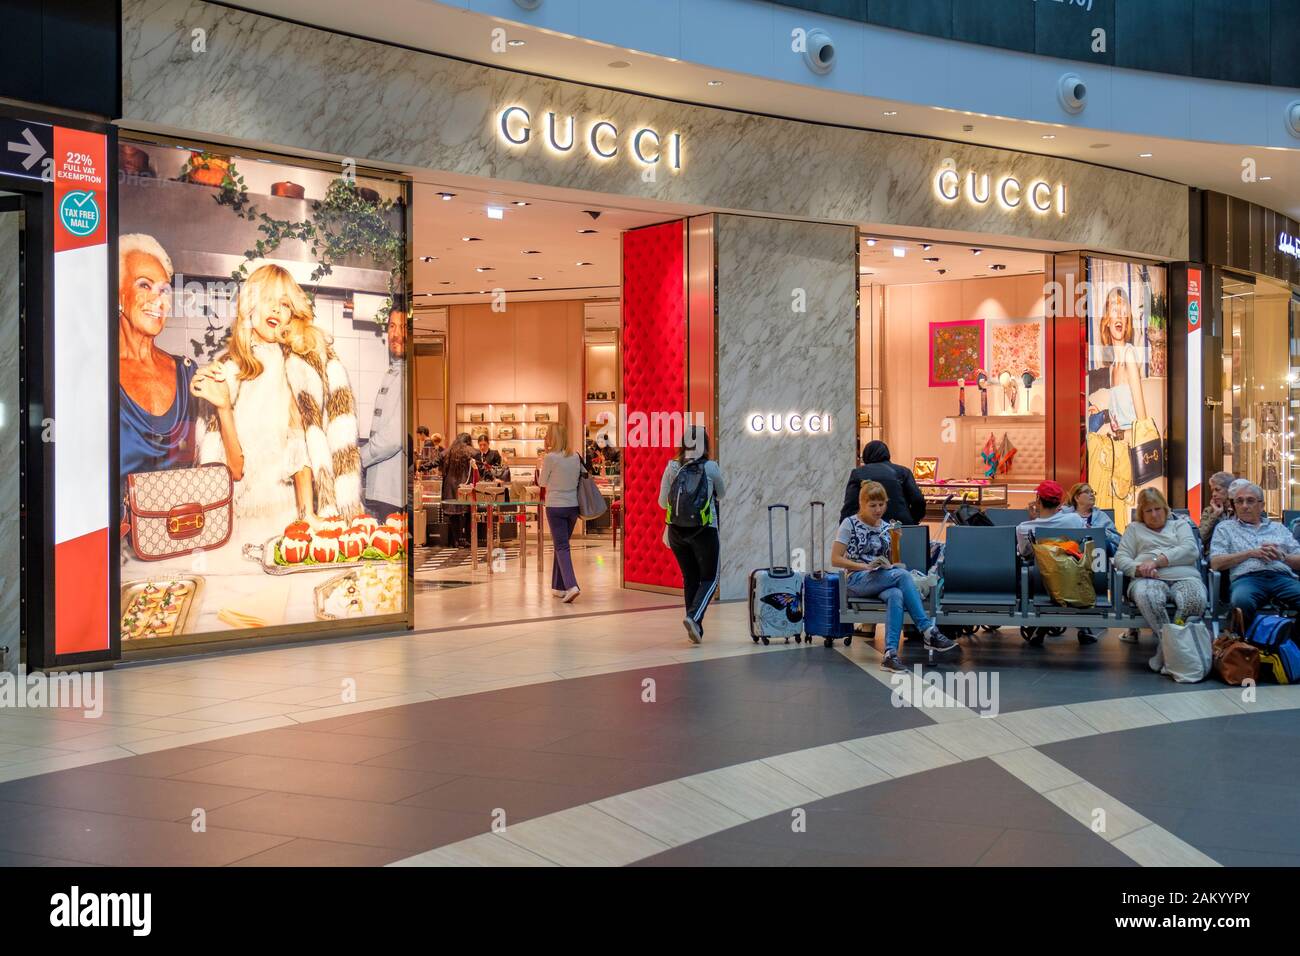 Airport shopping, Gucci store at the departure lounge of Rome Fiumicino Airport, Italy Stock Photo - Alamy